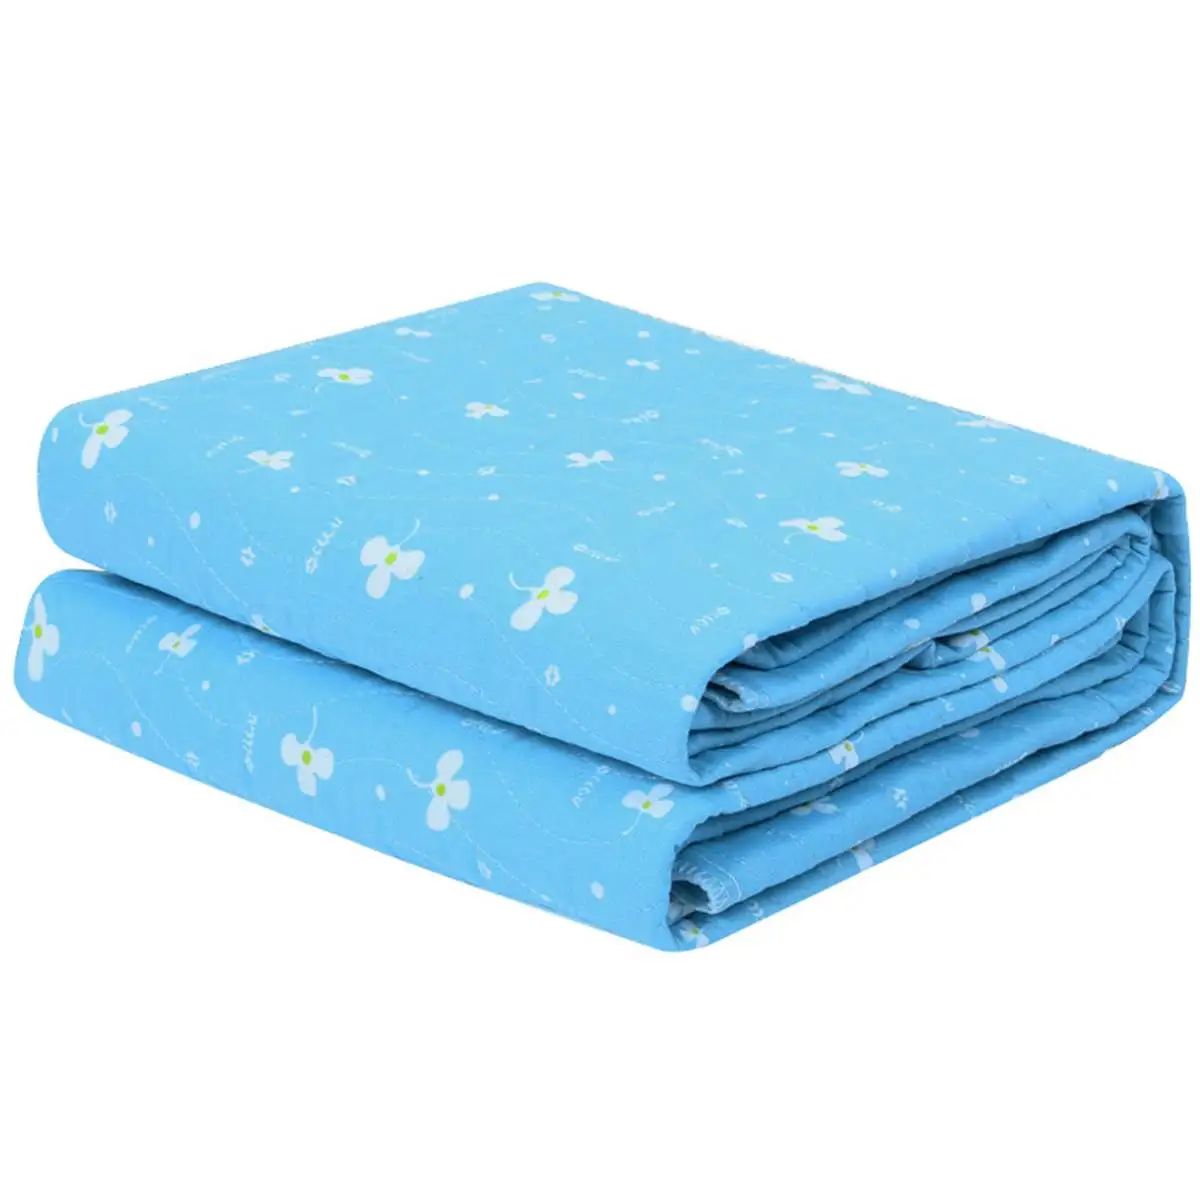 

3-layer Reusable Bedsheet Underpad Absorbent Mattress Protector Washable Urinal Mat Diaper Waterproof Kid Adult Incontinence Pad